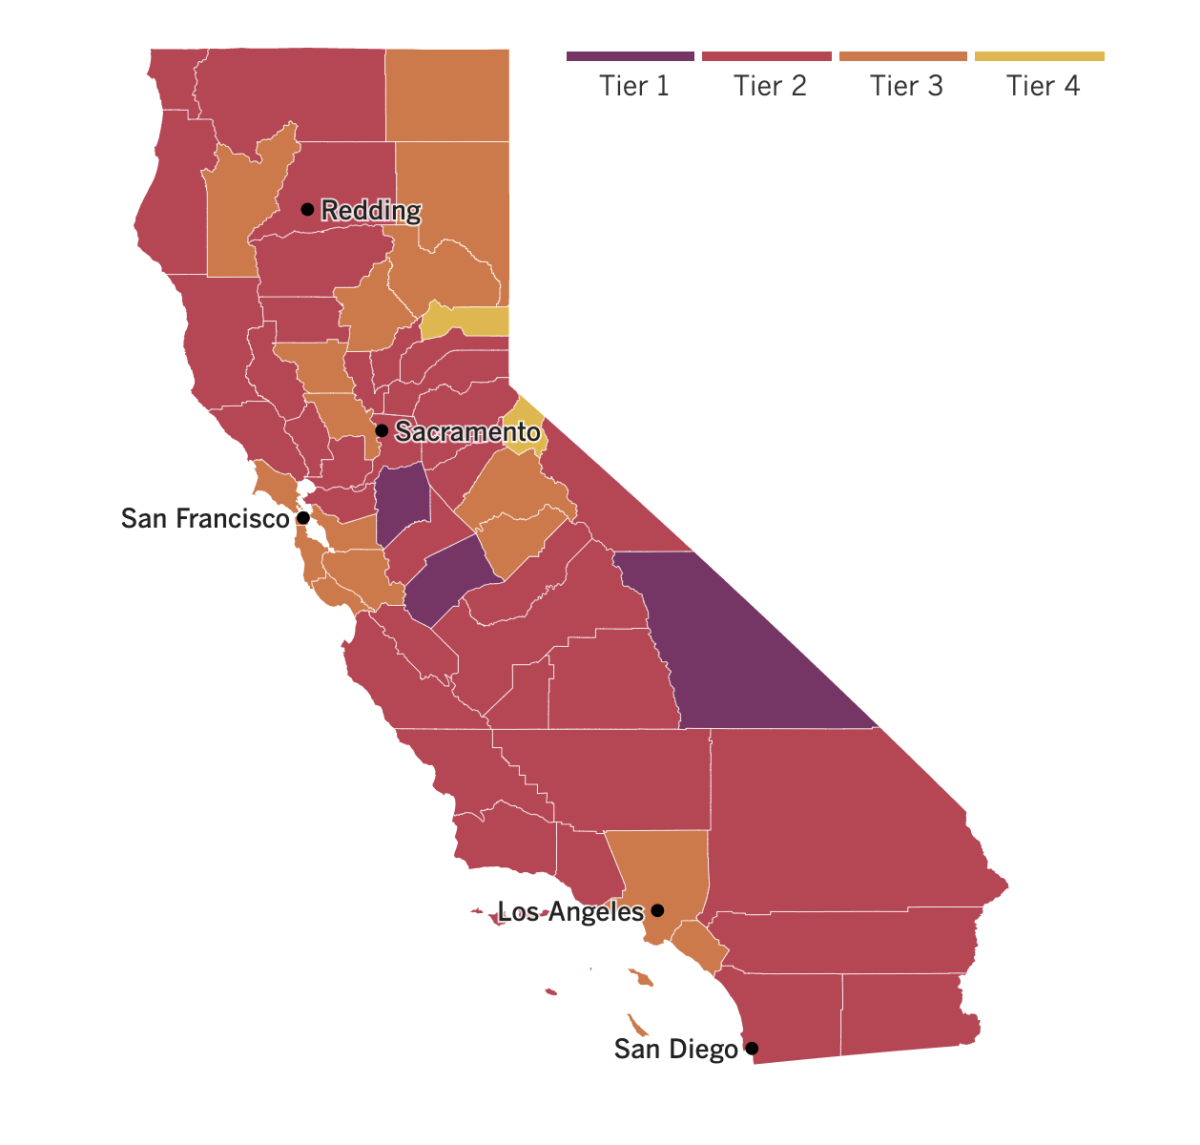 California reopening map: Most counties are in the red tier, and Los Angeles and Orange counties are newly in the orange tier